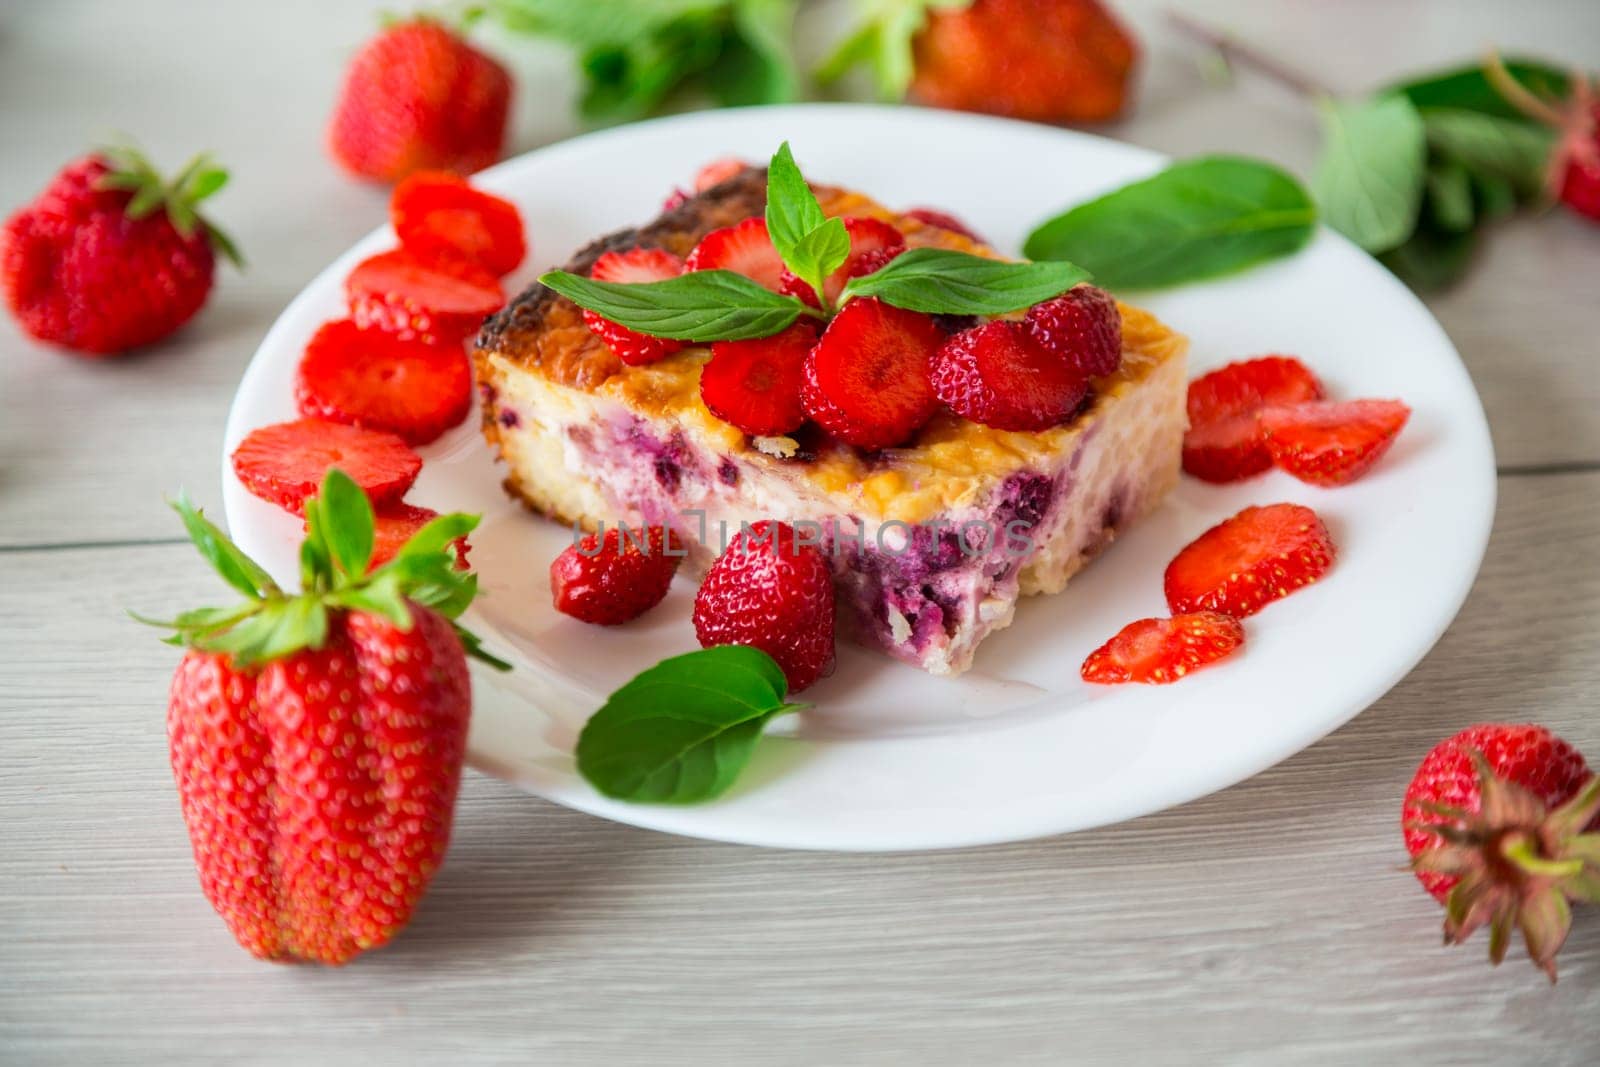 cooked cottage cheese casserole with berry and strawberry filling in a plate on the table